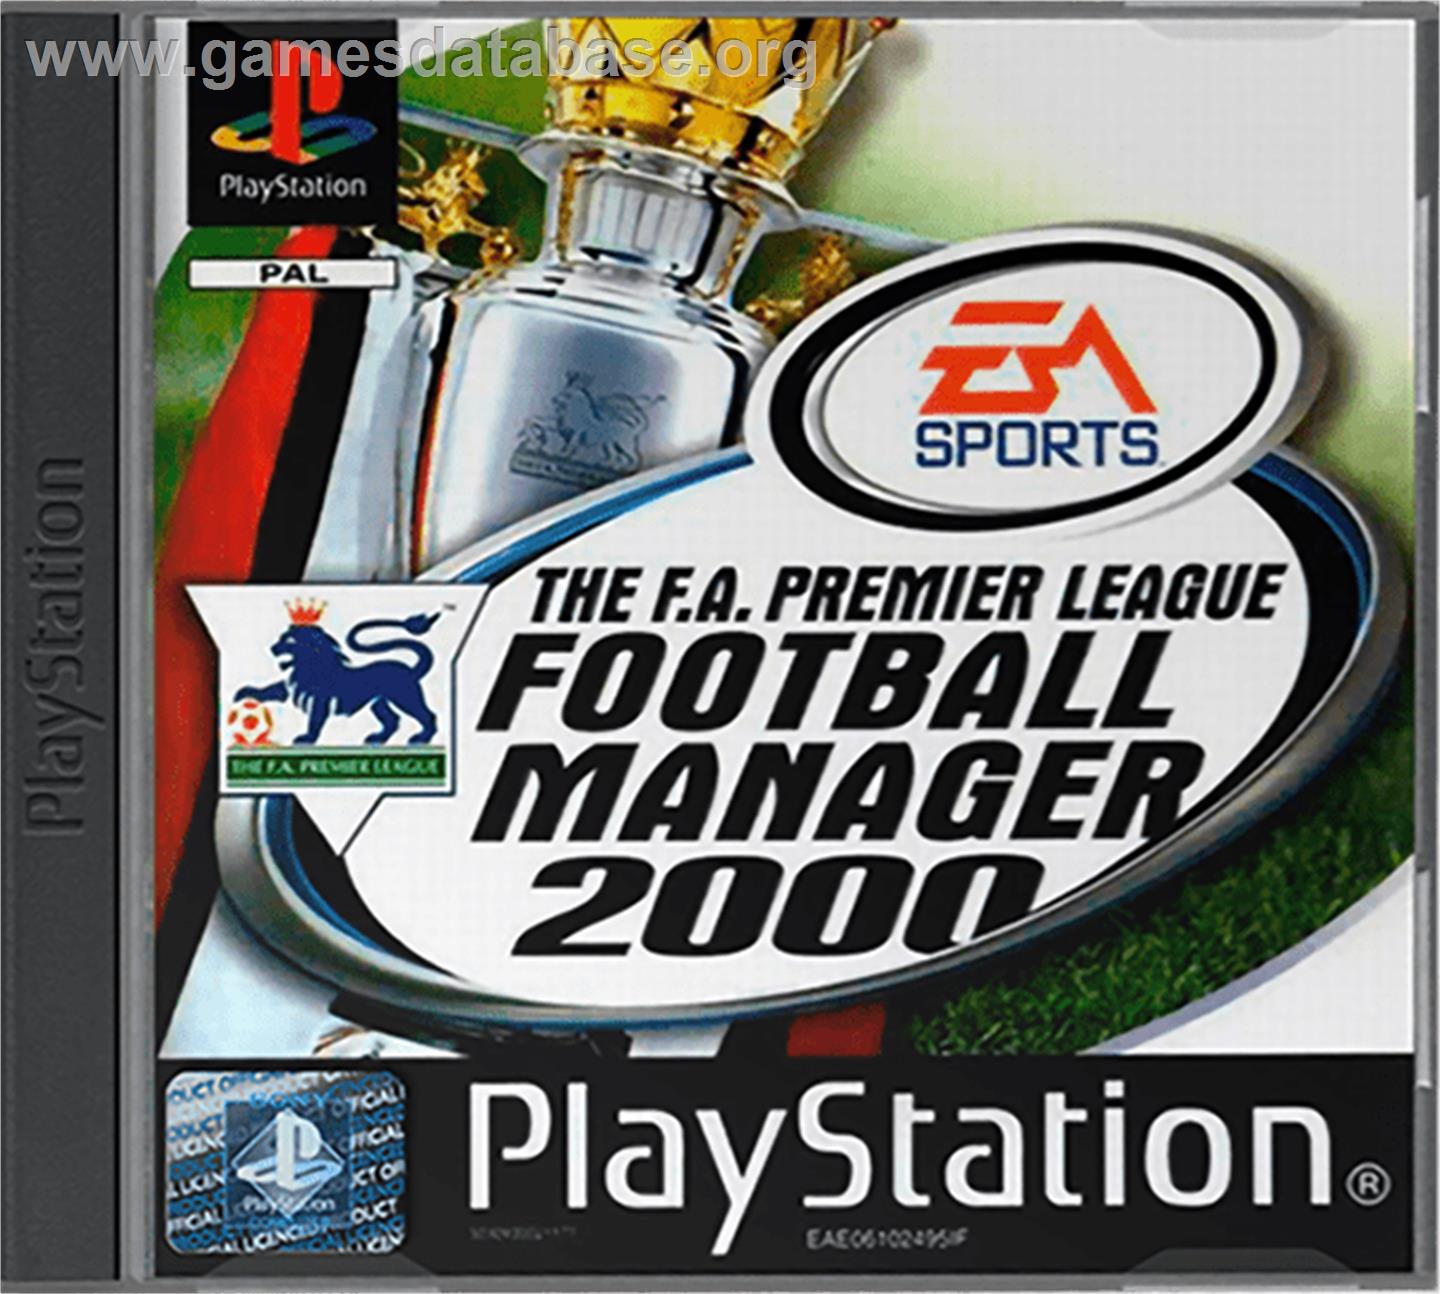 The F.A. Premier League Football Manager 2000 - Sony Playstation - Artwork - Box